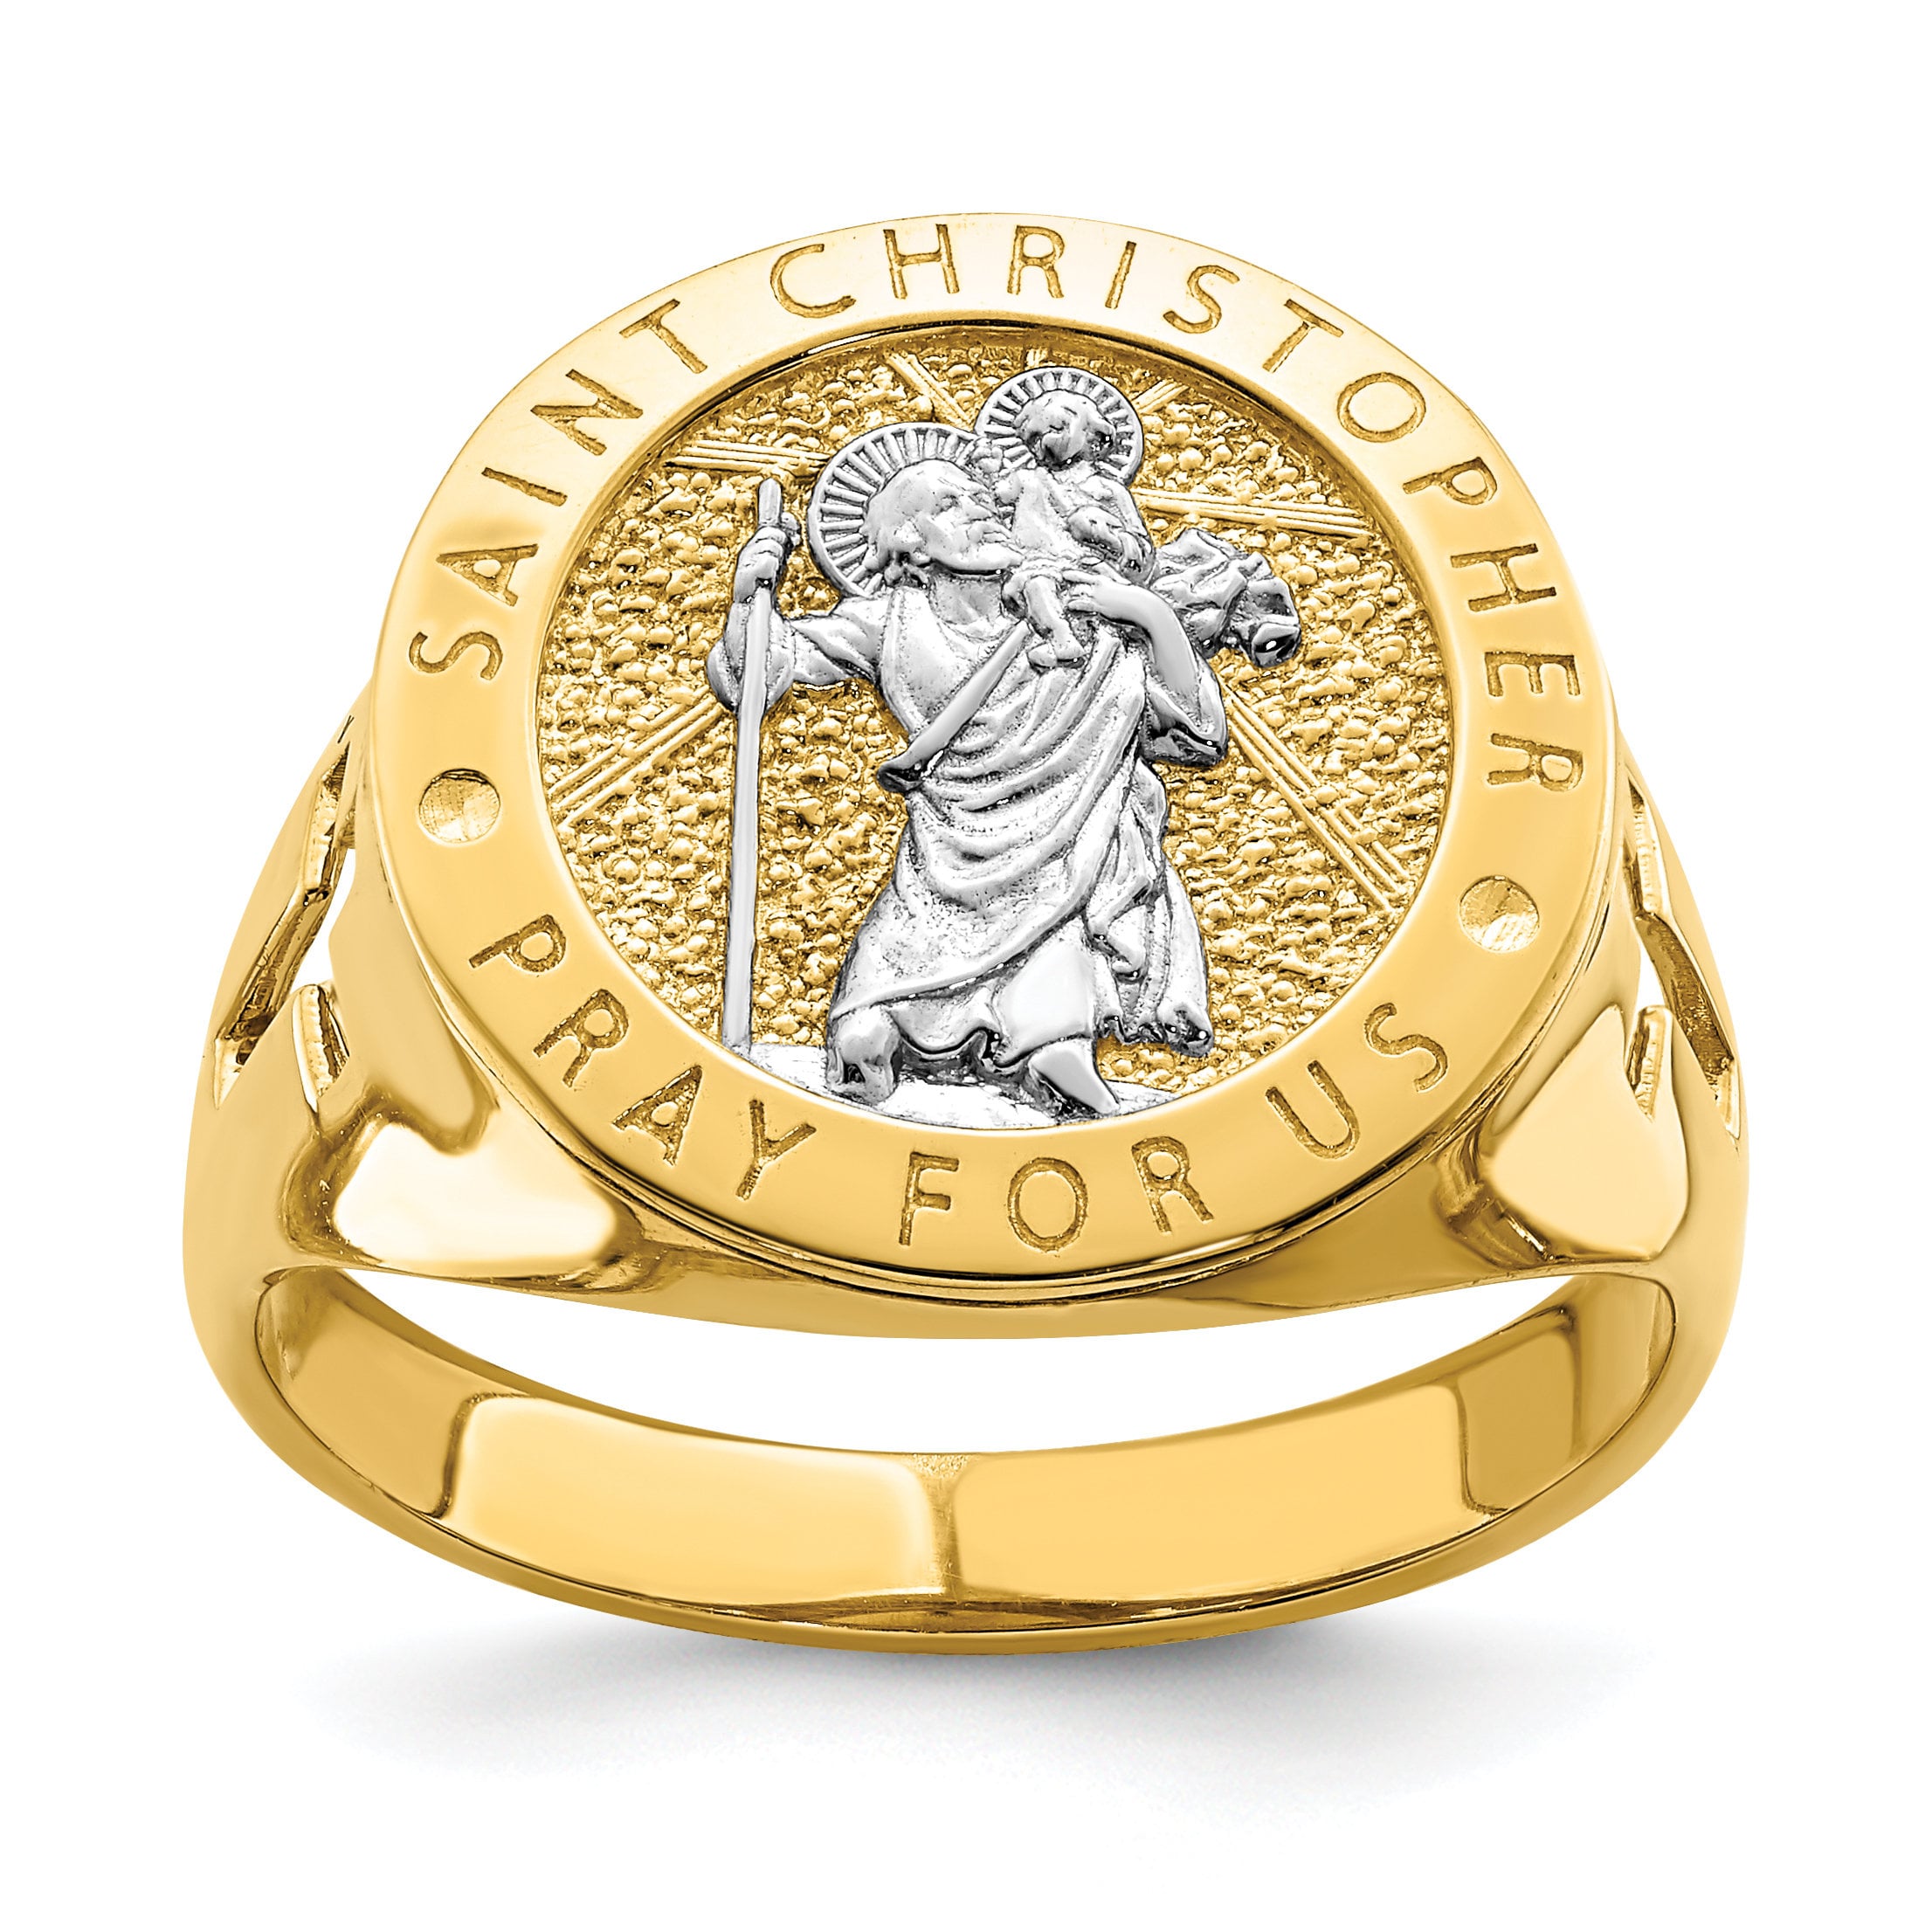 Buy 14K Yellow and White Gold Two-tone St. Christopher Ring Online